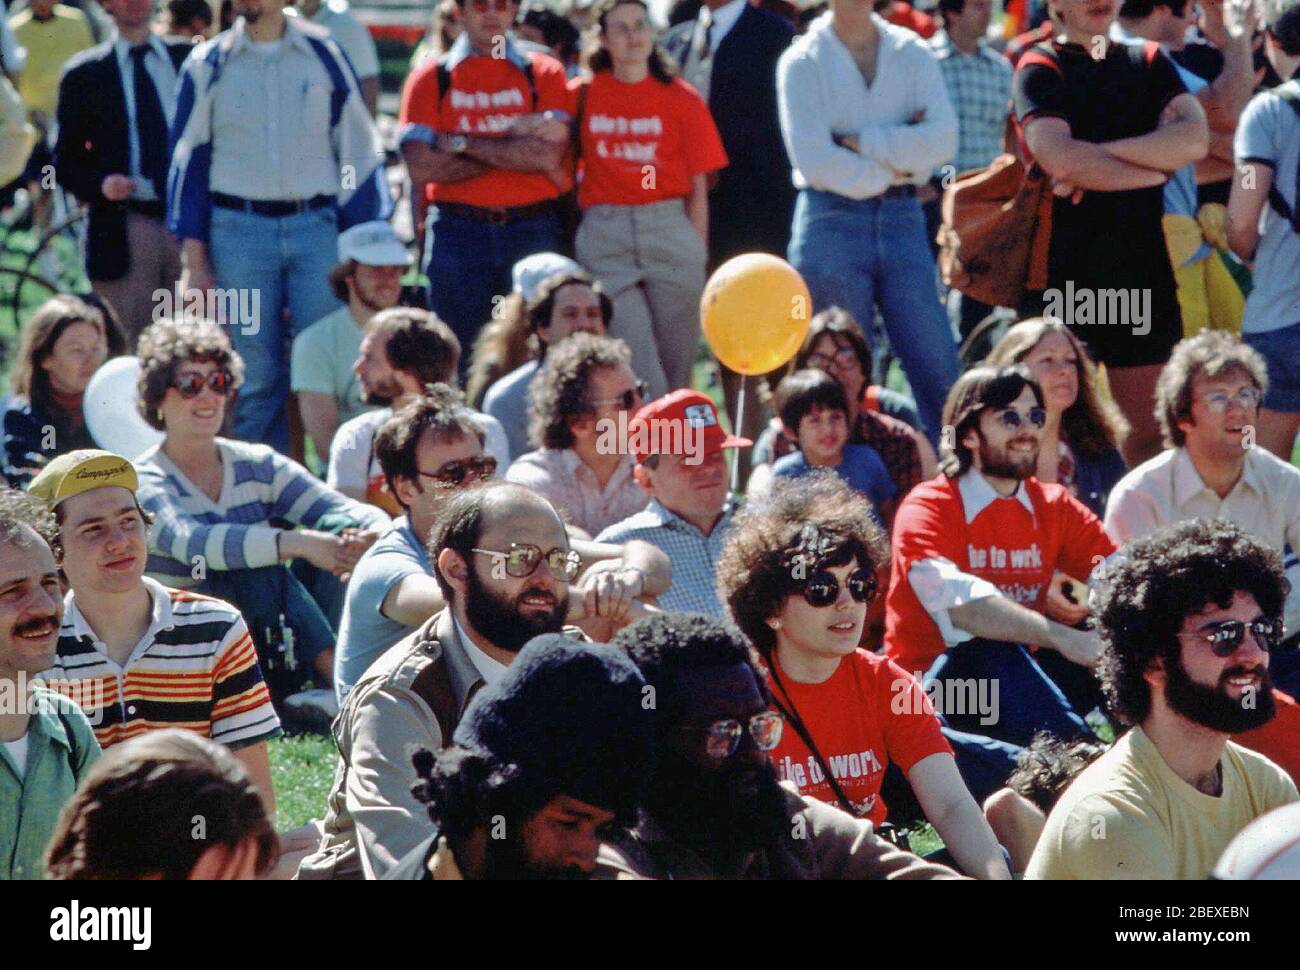 Crowd of people at public gathering ca. 1996 Stock Photo